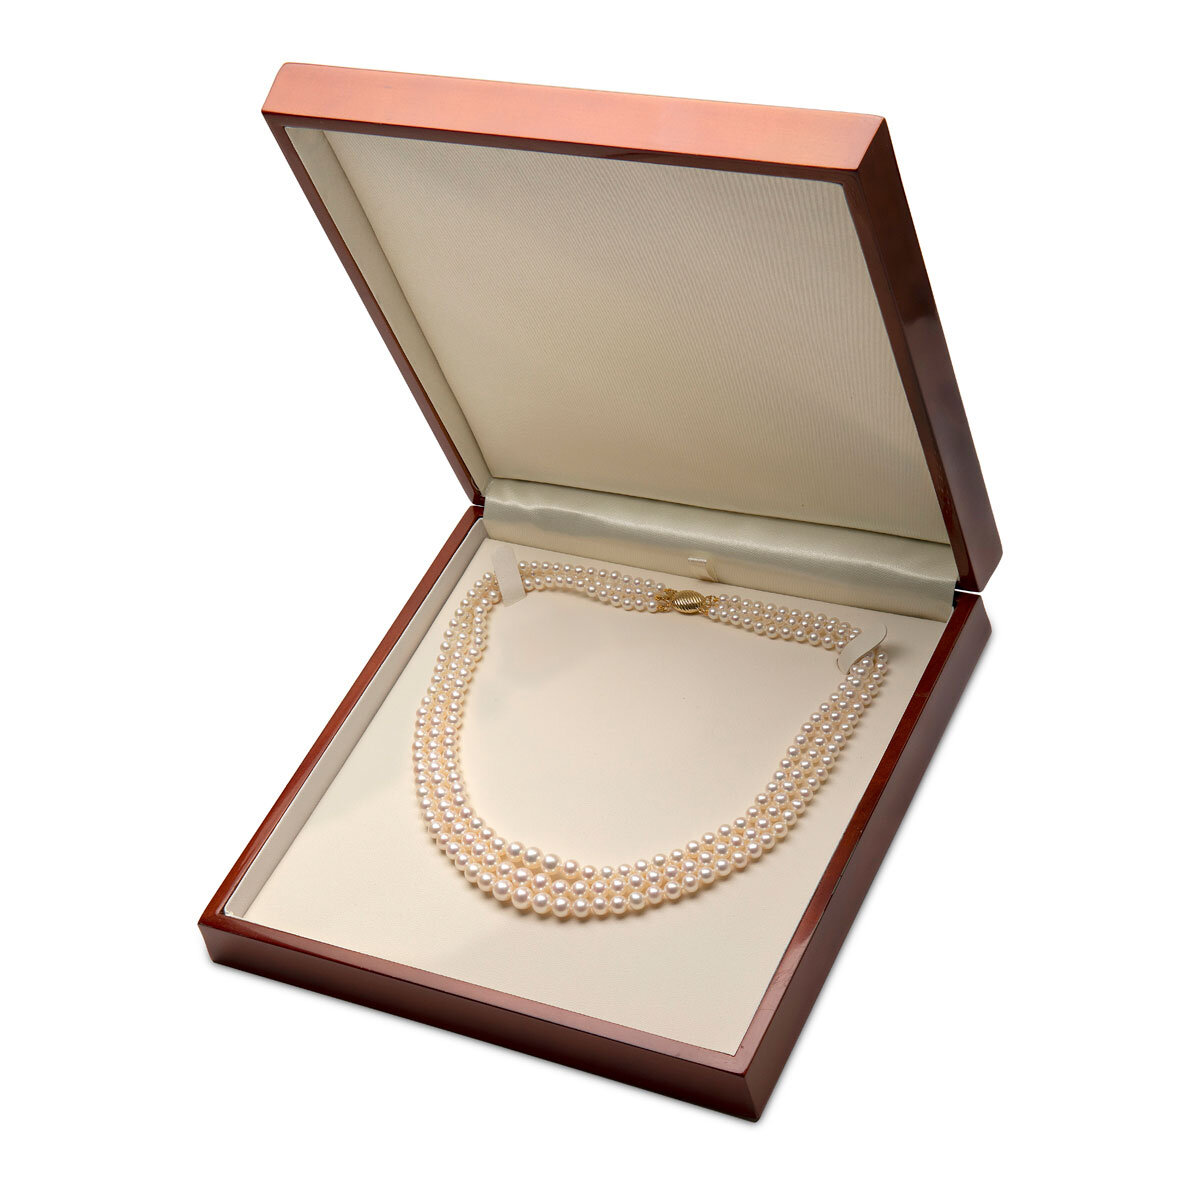 White Cultured Freshwater Pearl 3 Strand Necklace, 18ct Yellow Gold